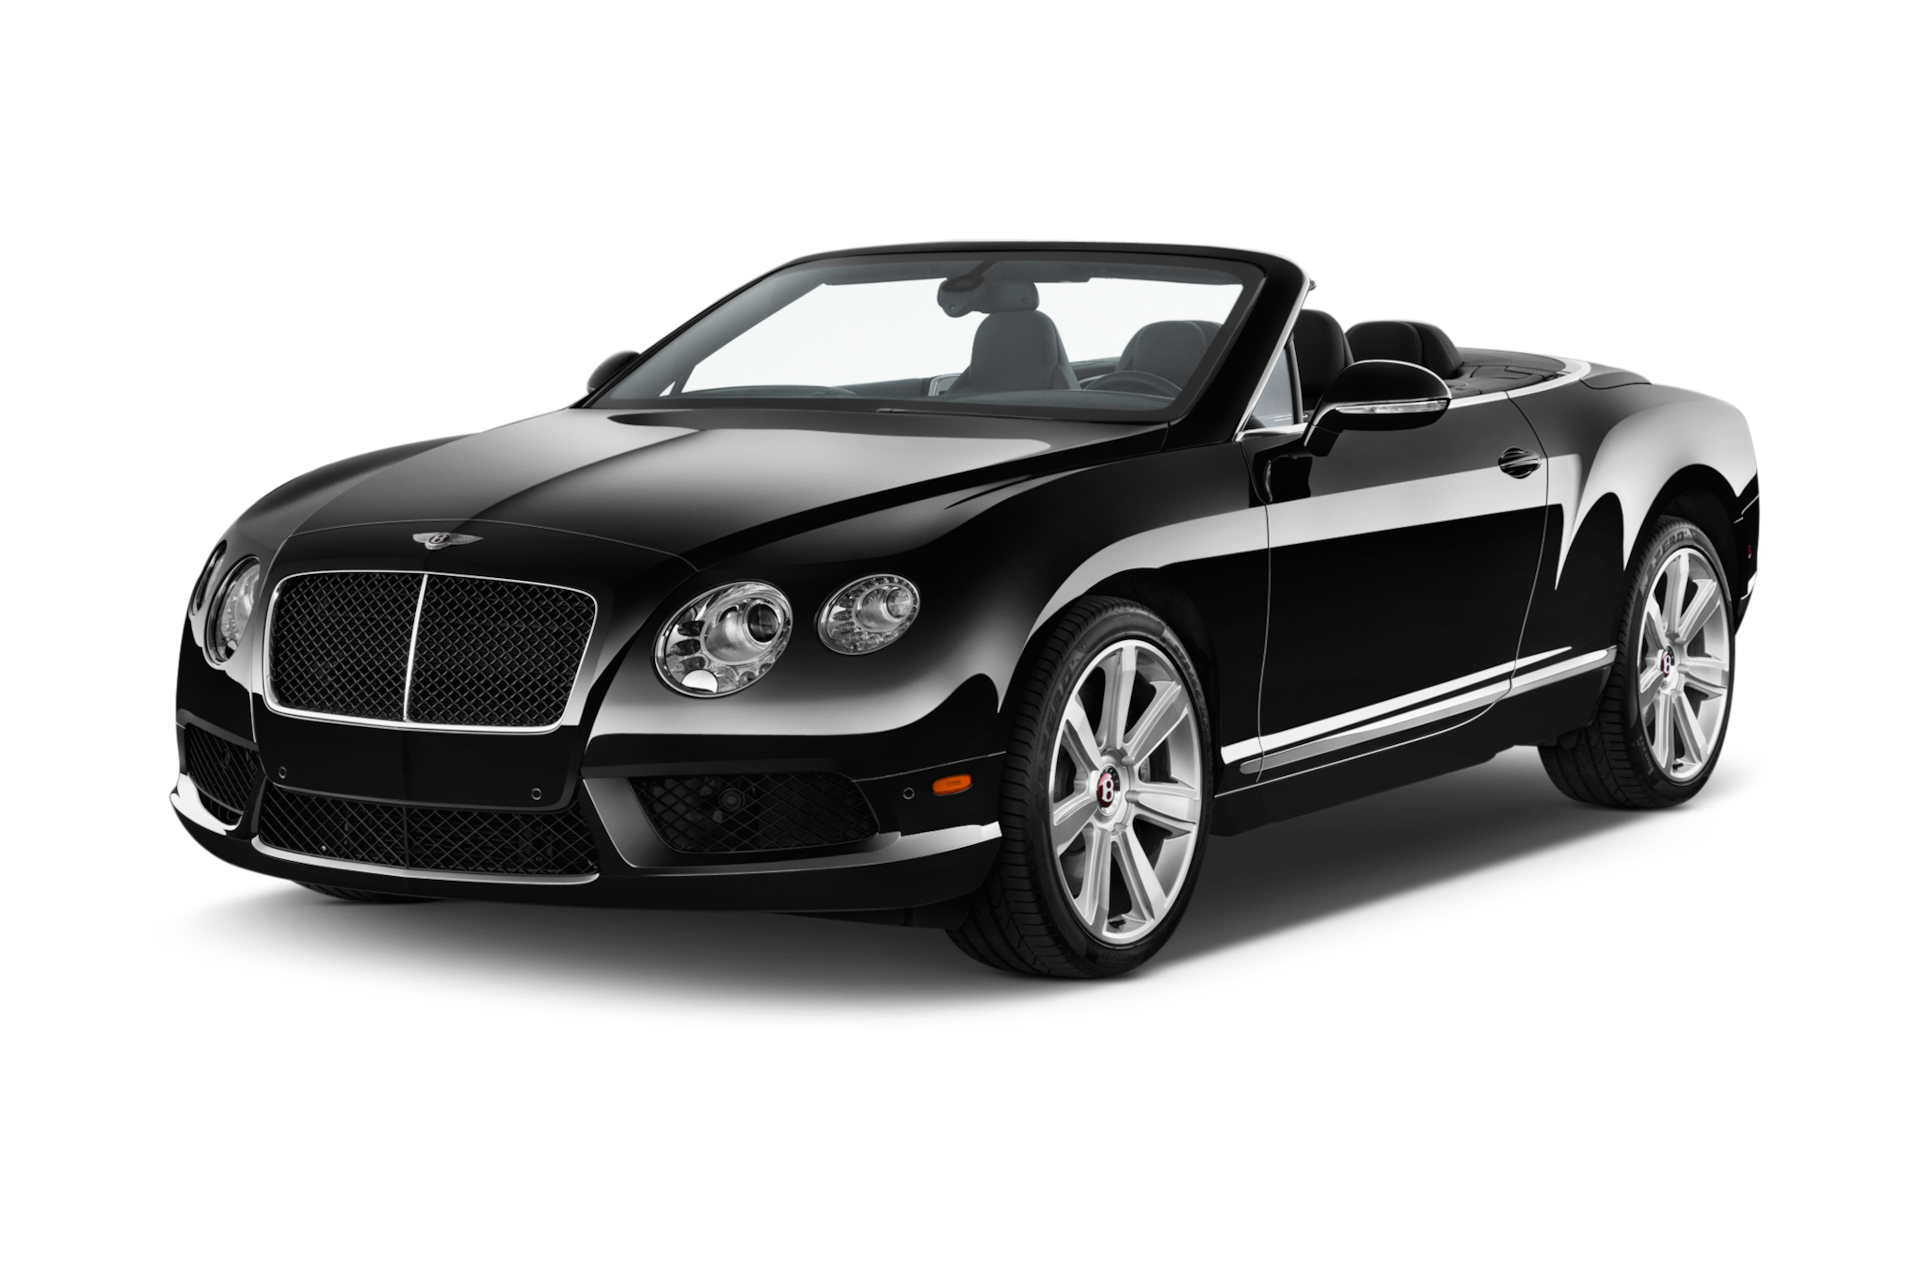 2015 Bentley Continental GTC Prices, Reviews, and Photos - MotorTrend